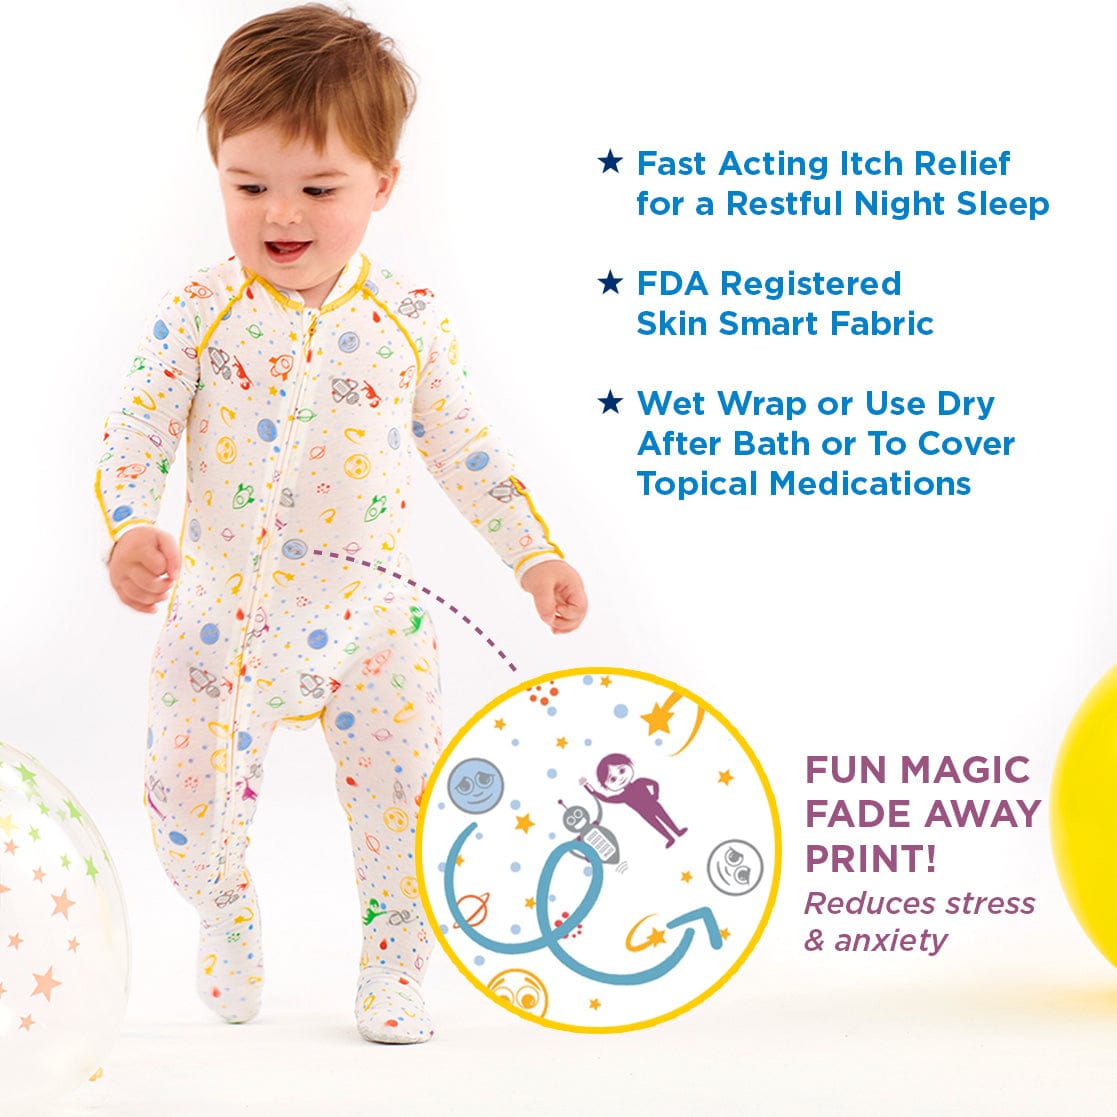 “Eczema Baby Sleepwear and Clothing Stops Scratching with no scratch mittens at Night”